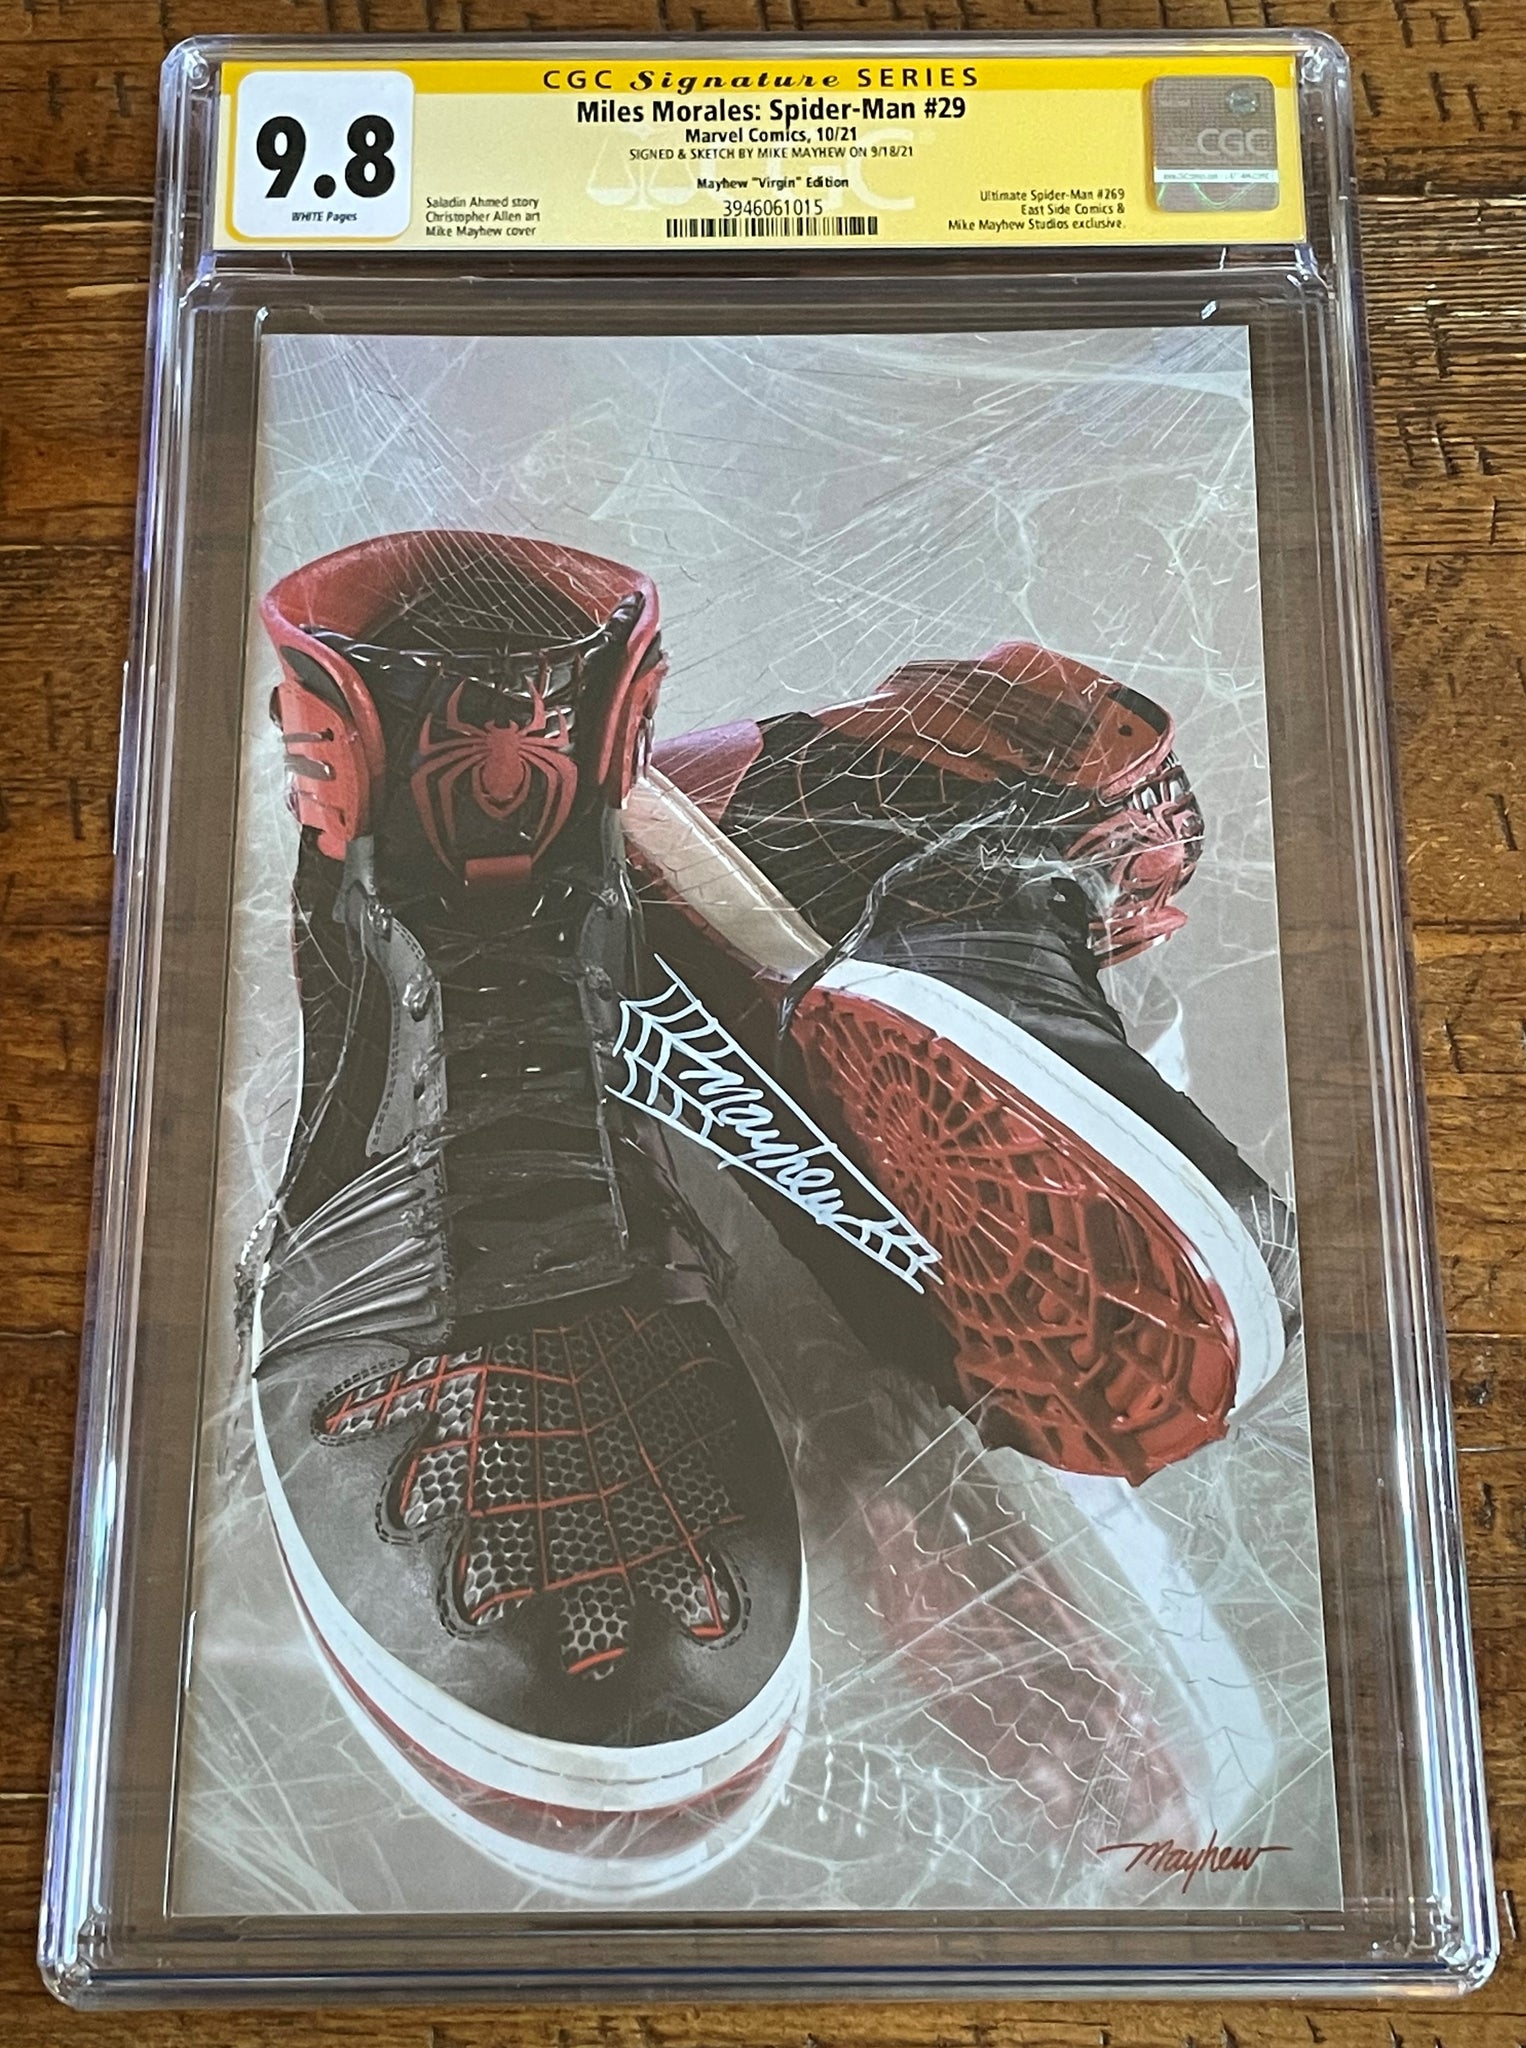 MILES MORALES: SPIDER-MAN #29 CGC SS 9.8 MIKE MAYHEW THWIP SIGNED SNEAKER VIRGIN VARIANT-B